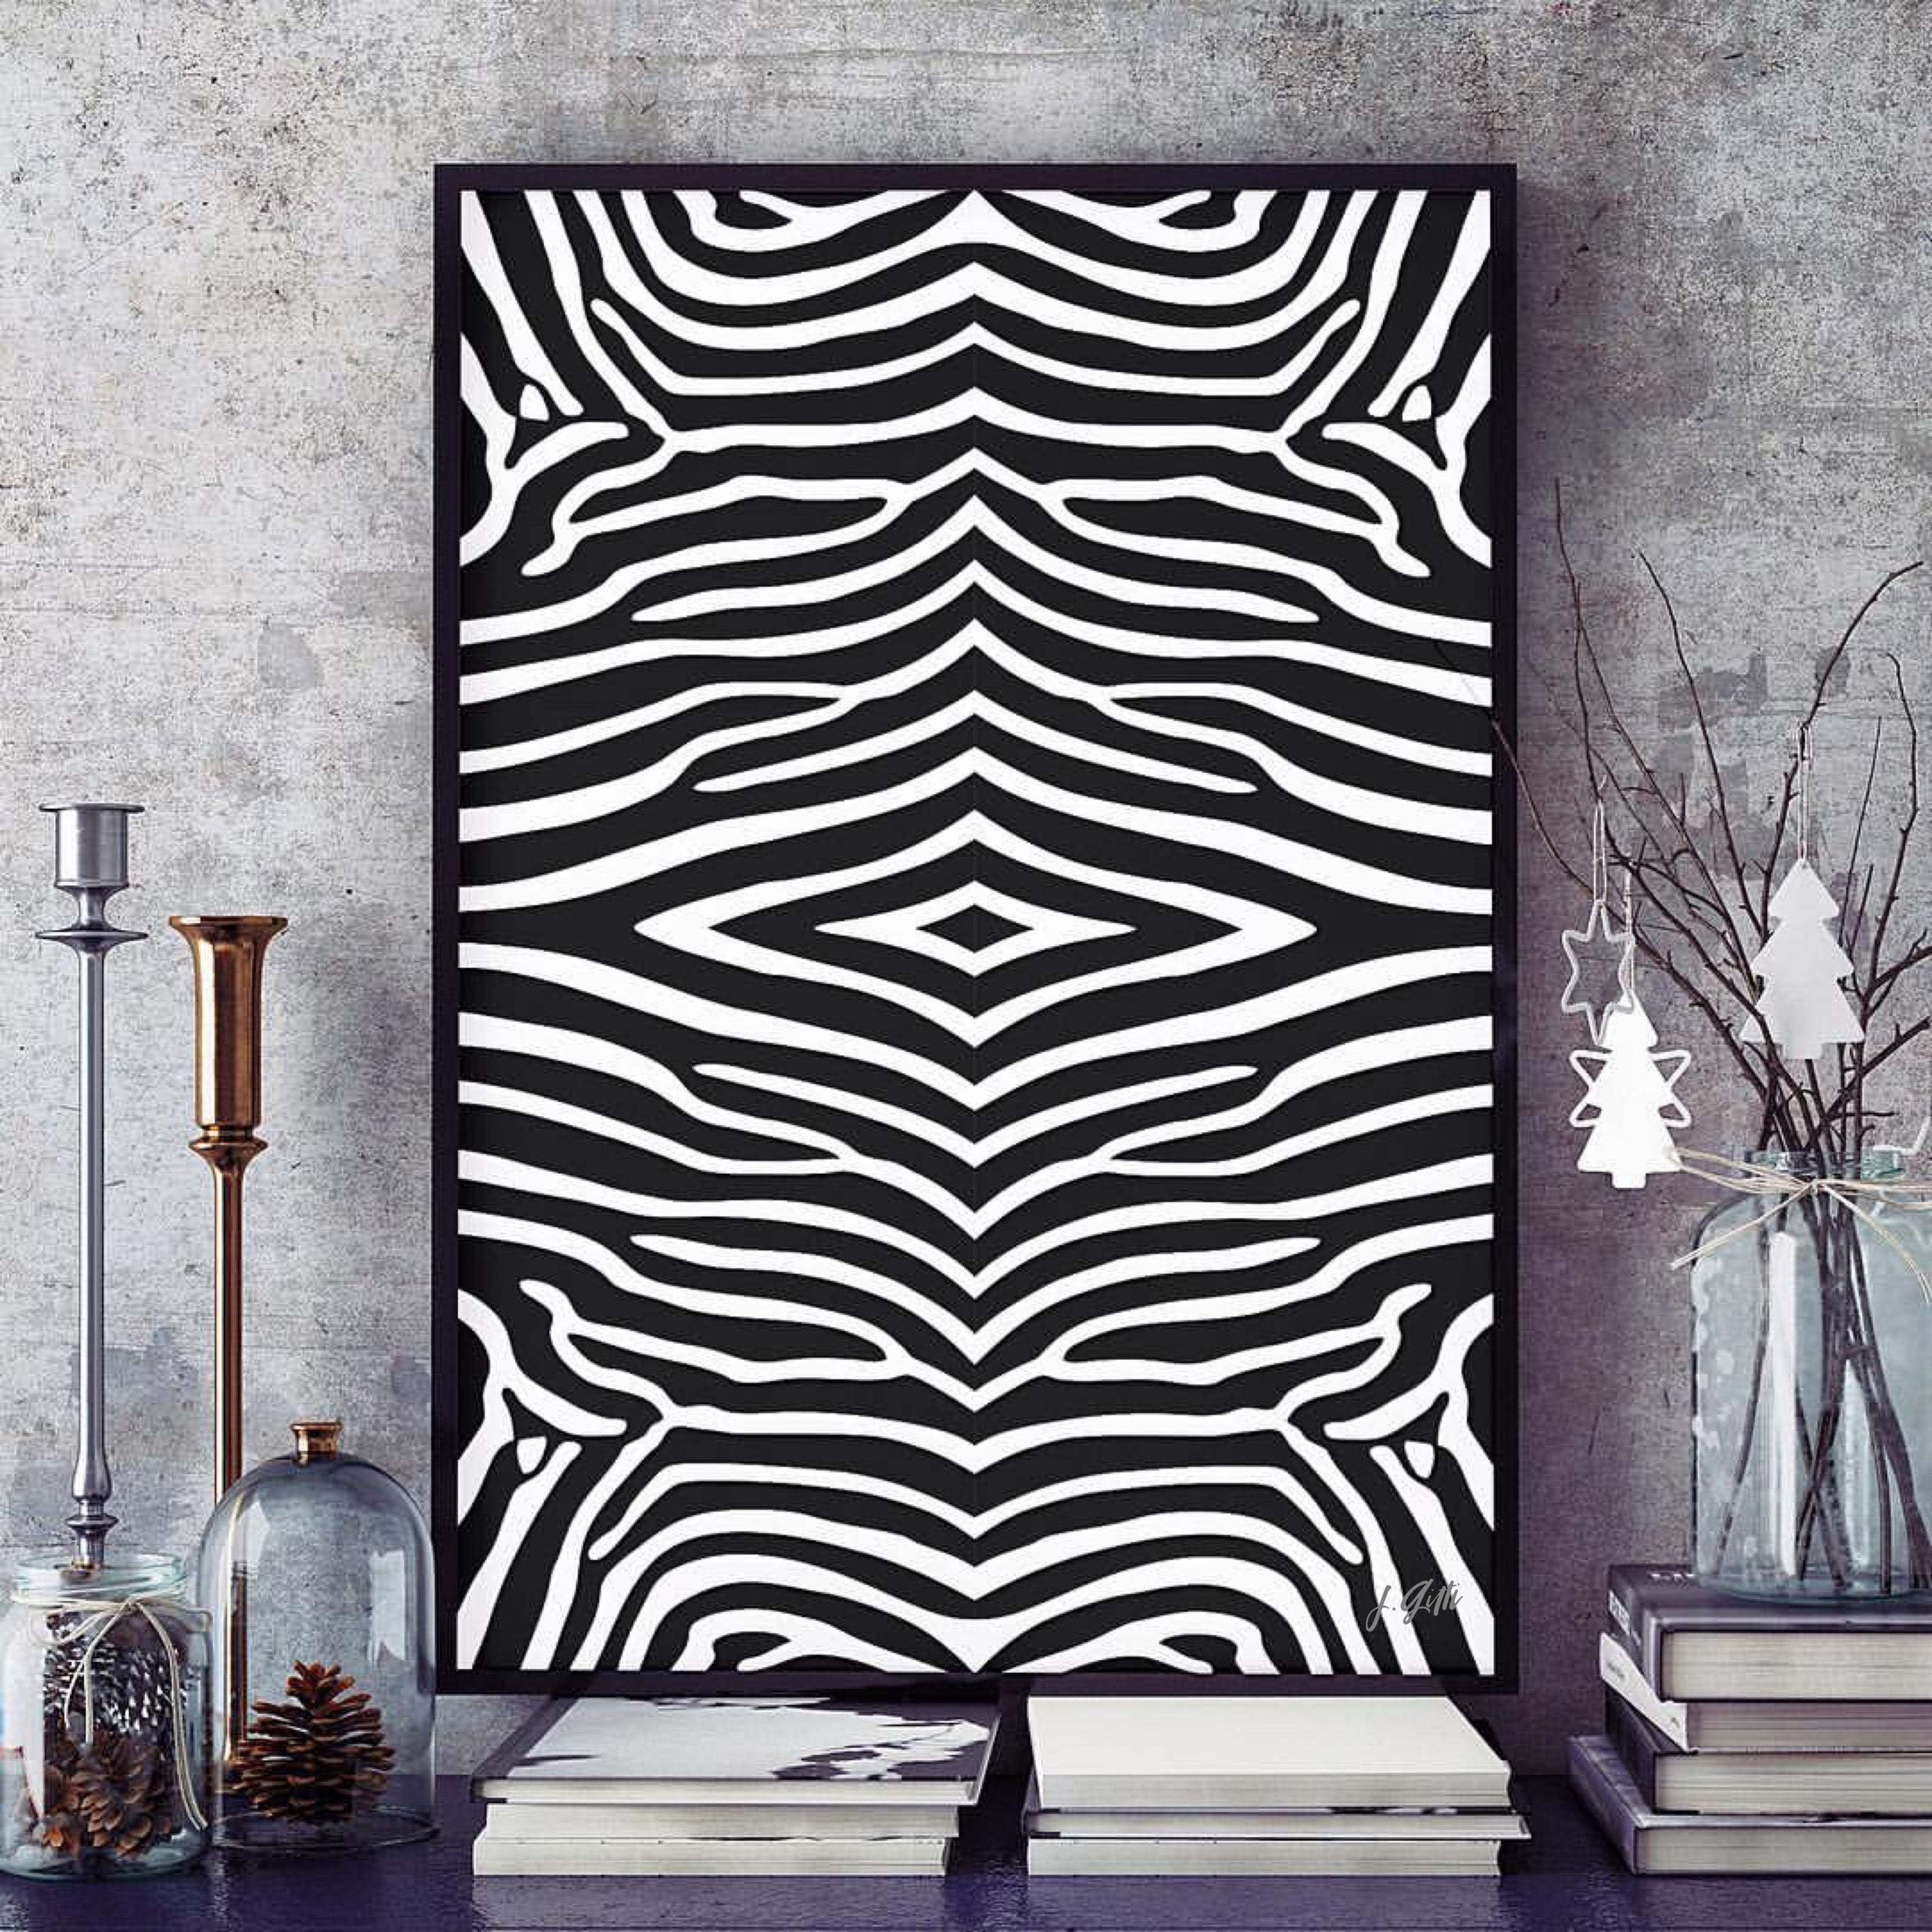 Zebra Art Poster to Decorate Environments in Instant Download